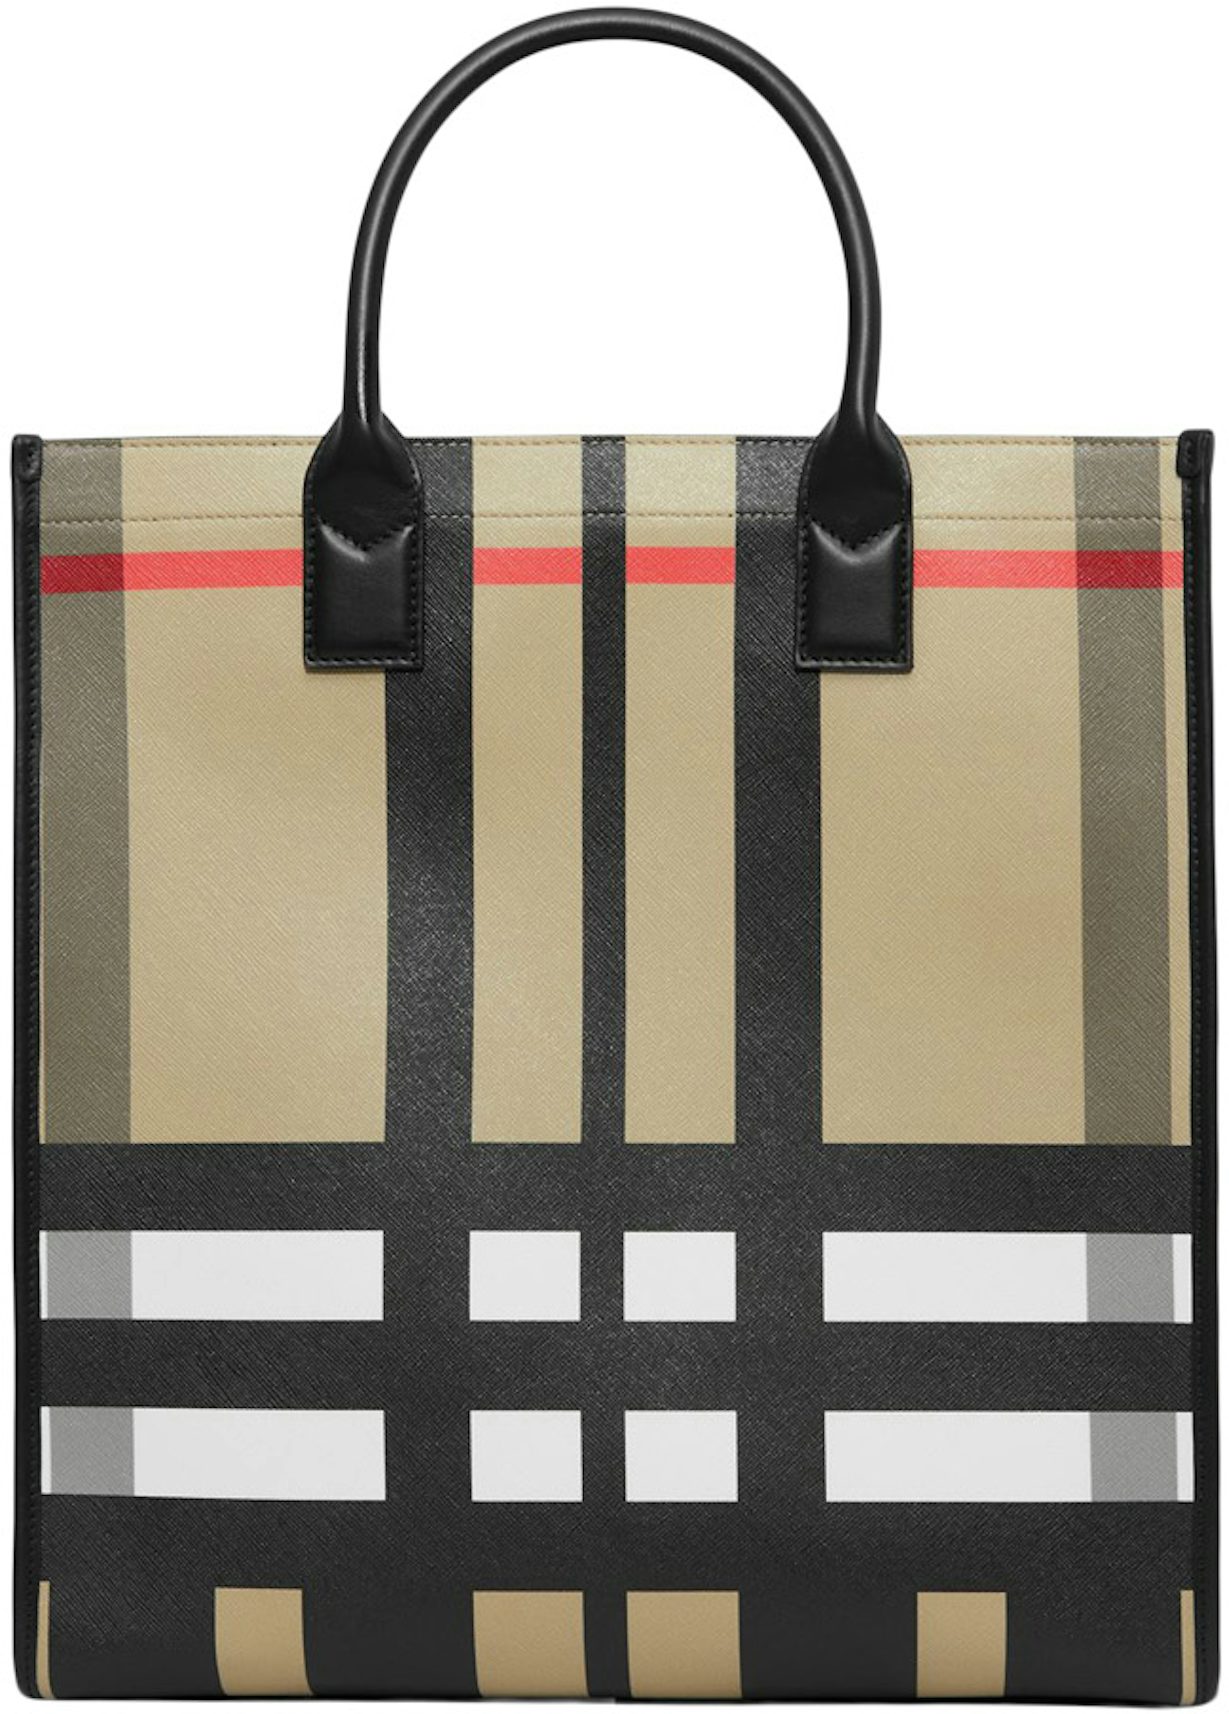 Burberry Exaggerated Check and Leather Tote Bag Archive Beige